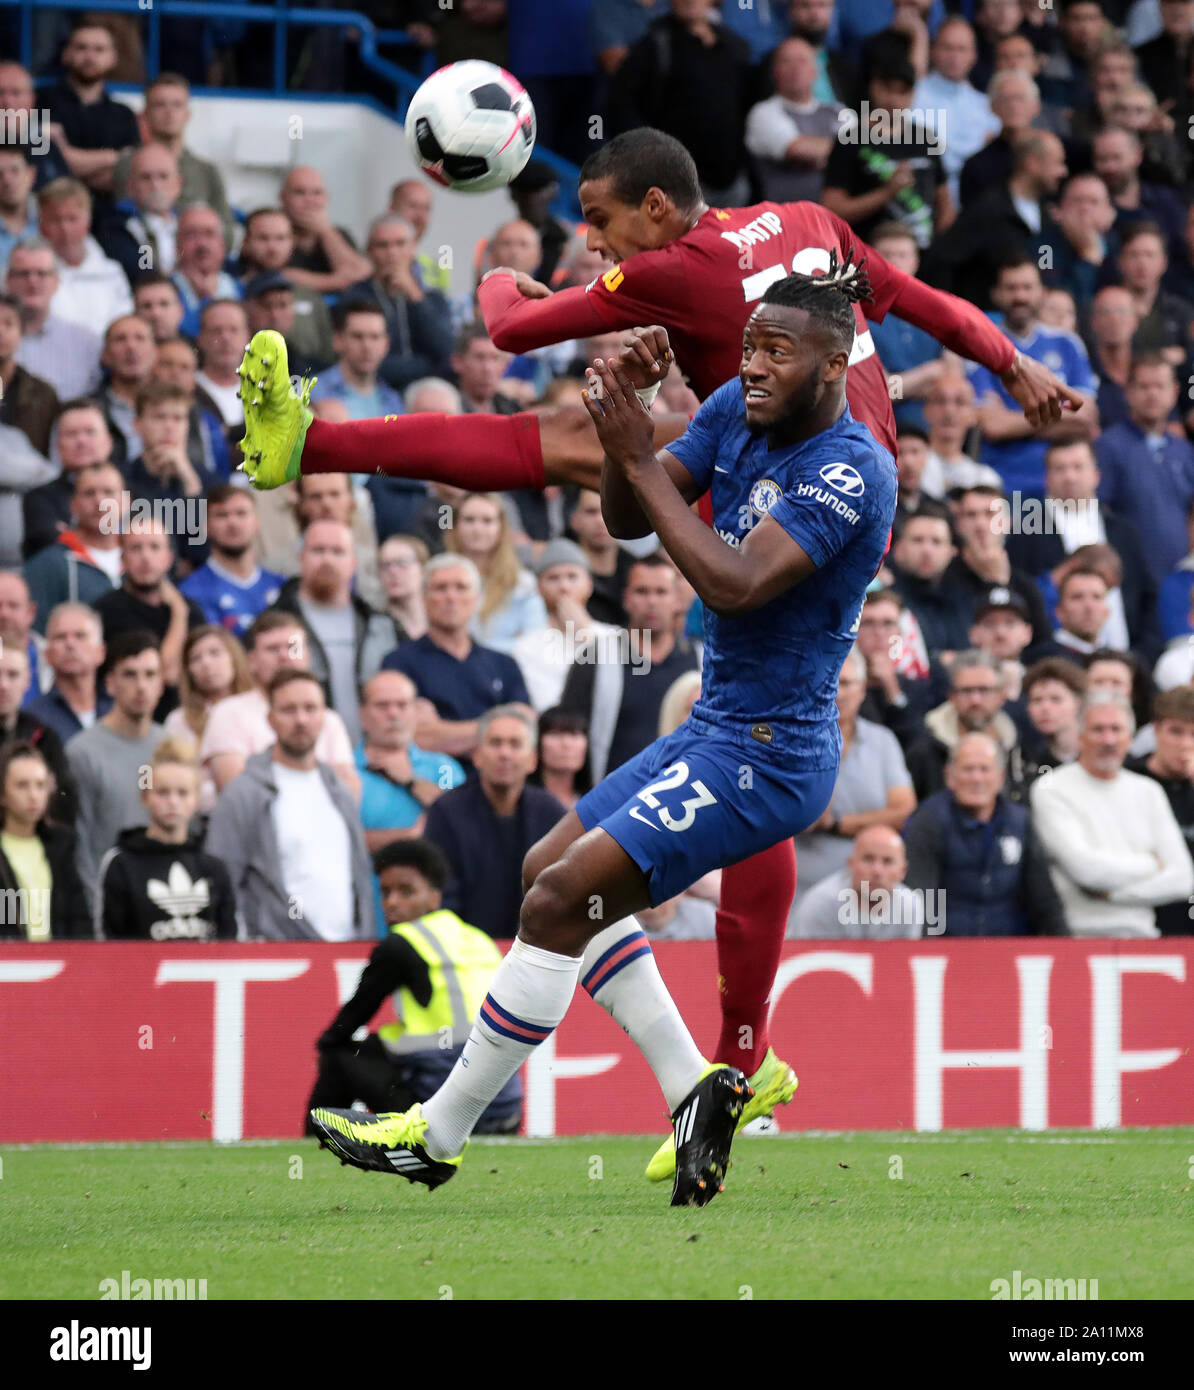 LONDON, ENGLAND - SEPTEMBER 22: Liverpool’s Joel Matip (L) and Chelsea’s Michy Batshuayi fight for the ball during the Premier League match between Chelsea FC and Liverpool FC at Stamford Bridge on September 22, 2019 in London, United Kingdom. (Hugo Philpott/MB Media) Stock Photo